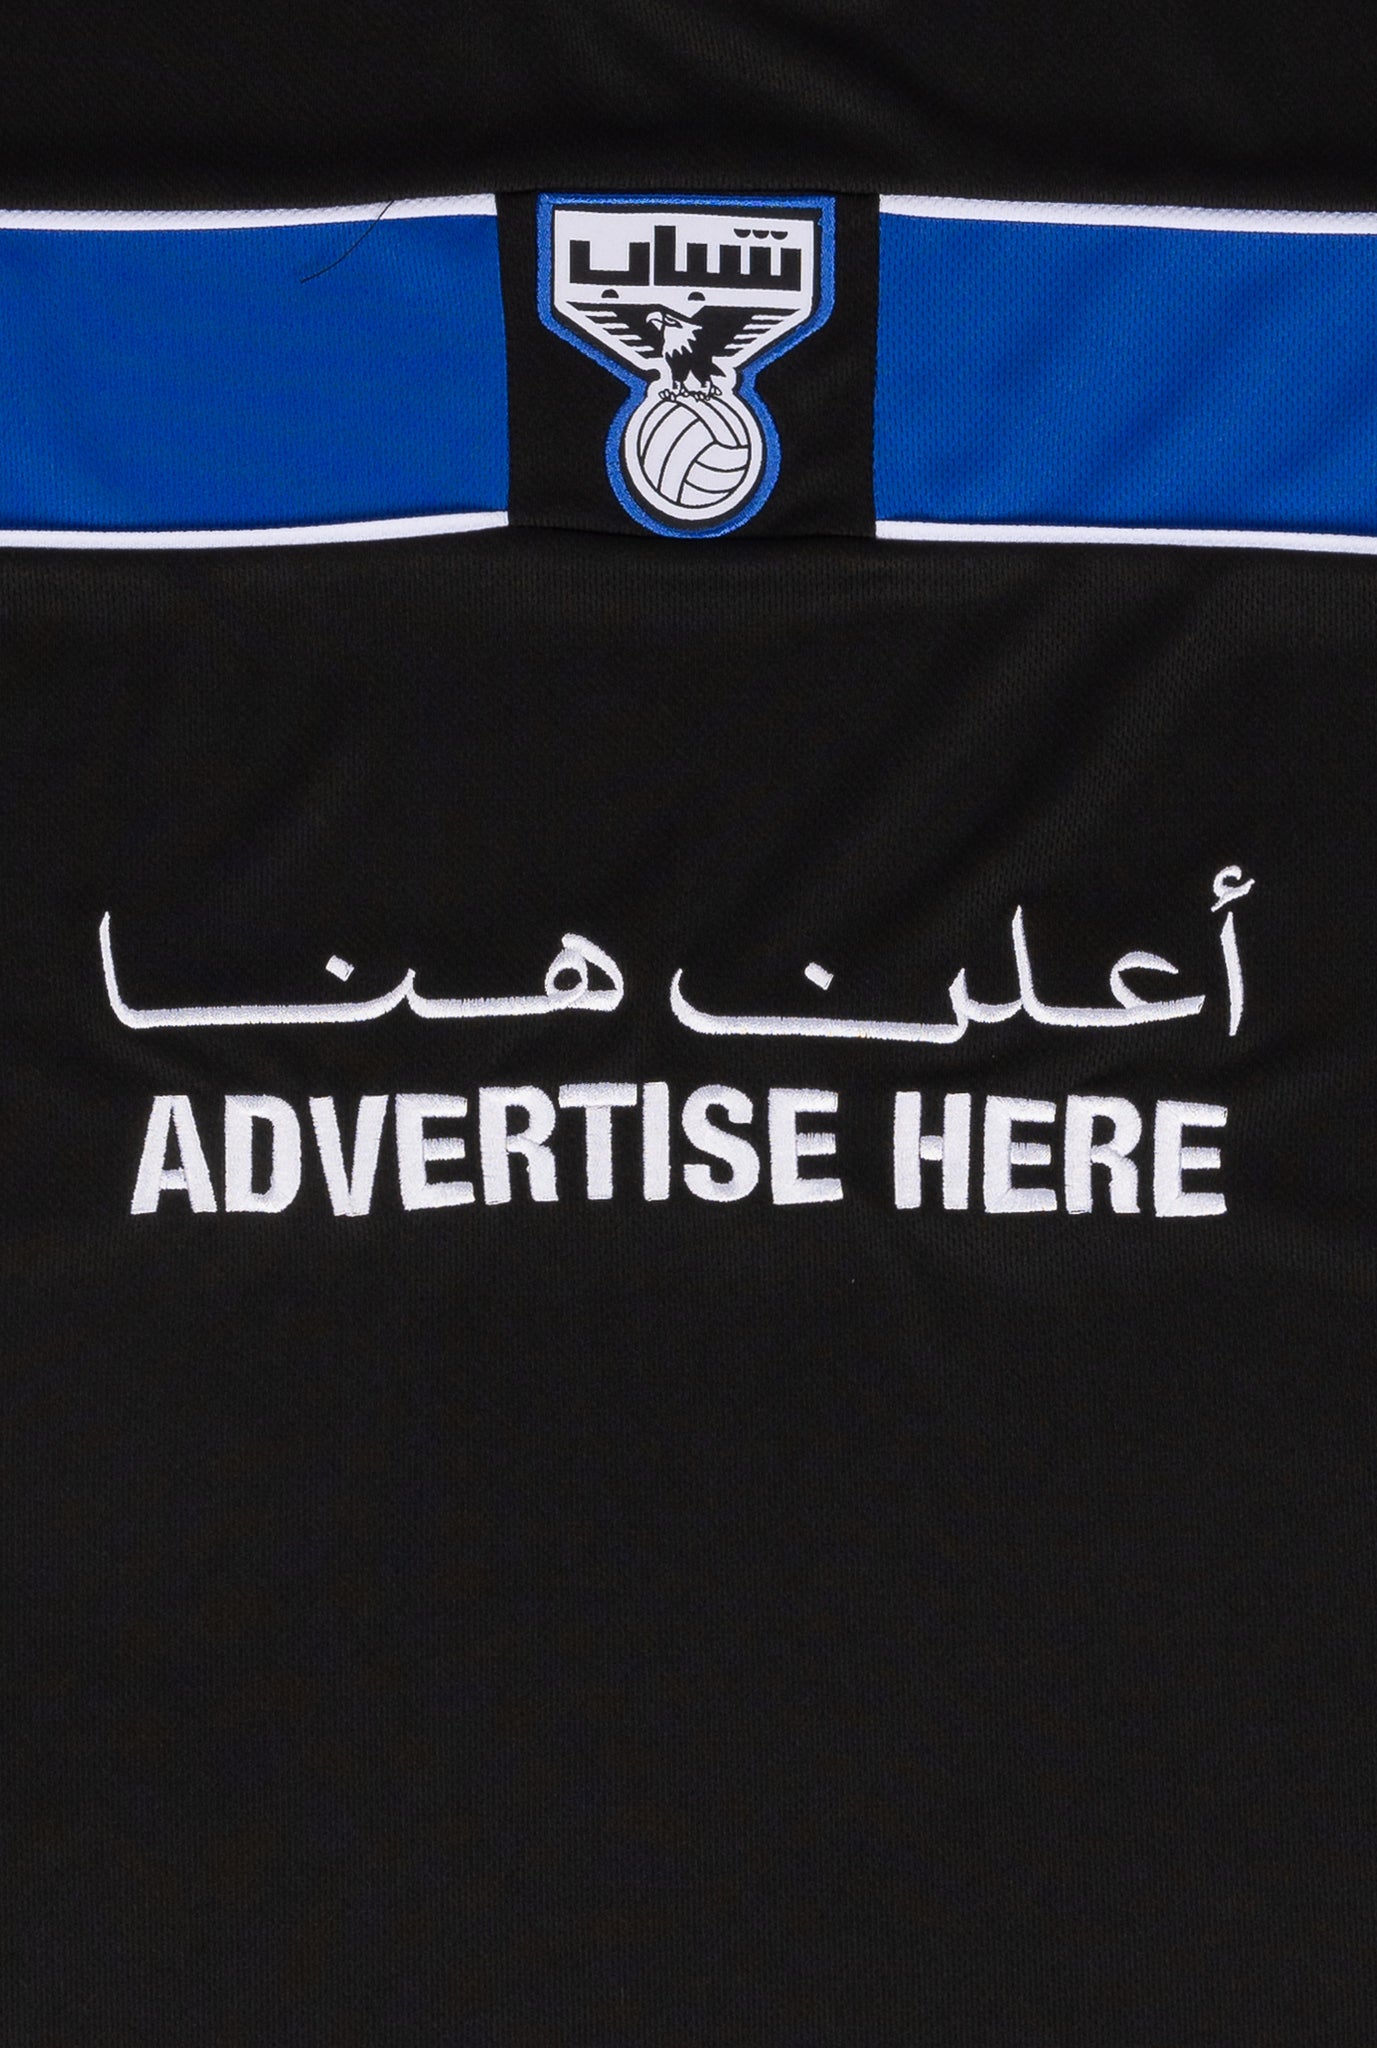 ADVERTISE HERE JERSEY